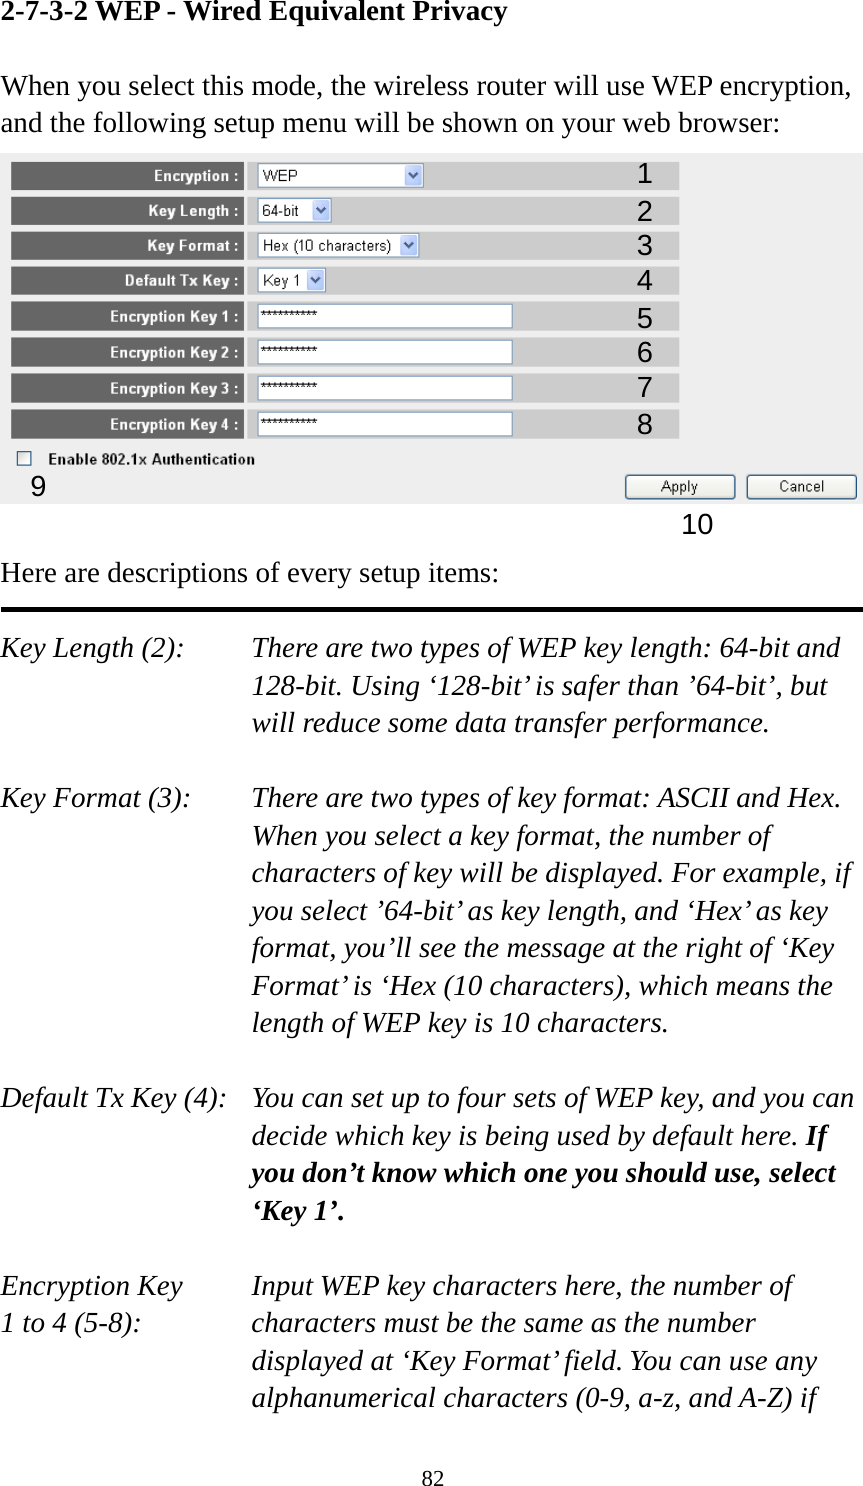 82 2-7-3-2 WEP - Wired Equivalent Privacy  When you select this mode, the wireless router will use WEP encryption, and the following setup menu will be shown on your web browser:   Here are descriptions of every setup items:  Key Length (2):    There are two types of WEP key length: 64-bit and 128-bit. Using ‘128-bit’ is safer than ’64-bit’, but will reduce some data transfer performance.  Key Format (3):    There are two types of key format: ASCII and Hex. When you select a key format, the number of characters of key will be displayed. For example, if you select ’64-bit’ as key length, and ‘Hex’ as key format, you’ll see the message at the right of ‘Key Format’ is ‘Hex (10 characters), which means the length of WEP key is 10 characters.  Default Tx Key (4):   You can set up to four sets of WEP key, and you can decide which key is being used by default here. If you don’t know which one you should use, select ‘Key 1’.  Encryption Key     Input WEP key characters here, the number of 1 to 4 (5-8):    characters must be the same as the number displayed at ‘Key Format’ field. You can use any alphanumerical characters (0-9, a-z, and A-Z) if 123 5 7 6 9 4 8 10 